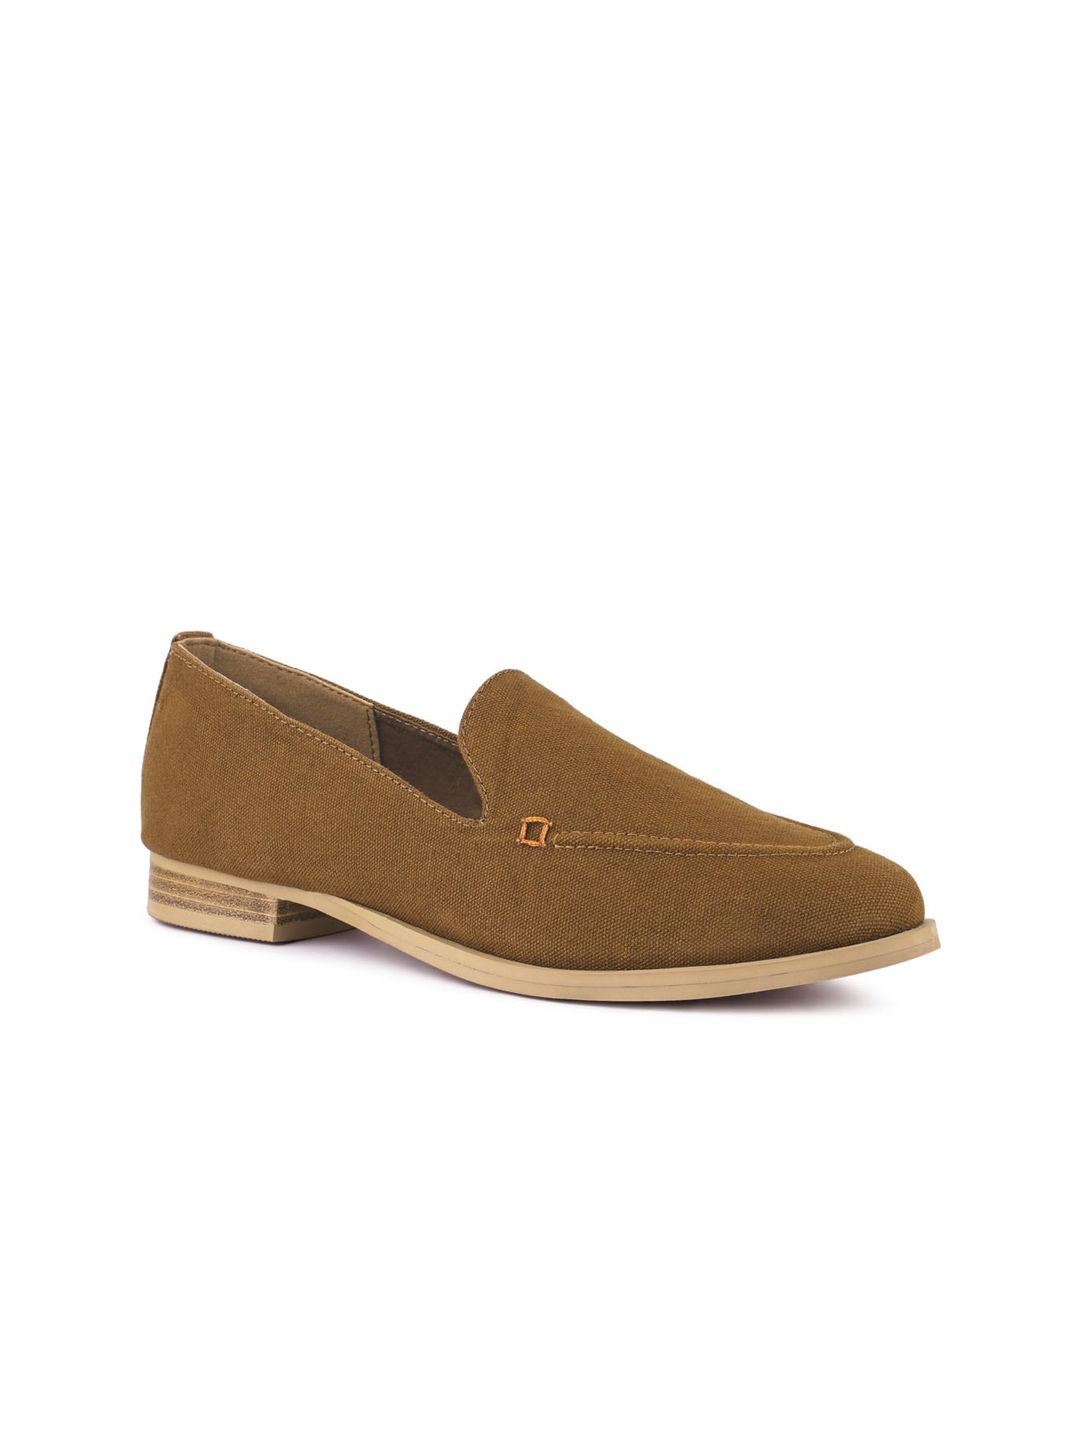 London Rag Women Tan Handcrafted Organic Canvas Slip-On Sneakers Price in India